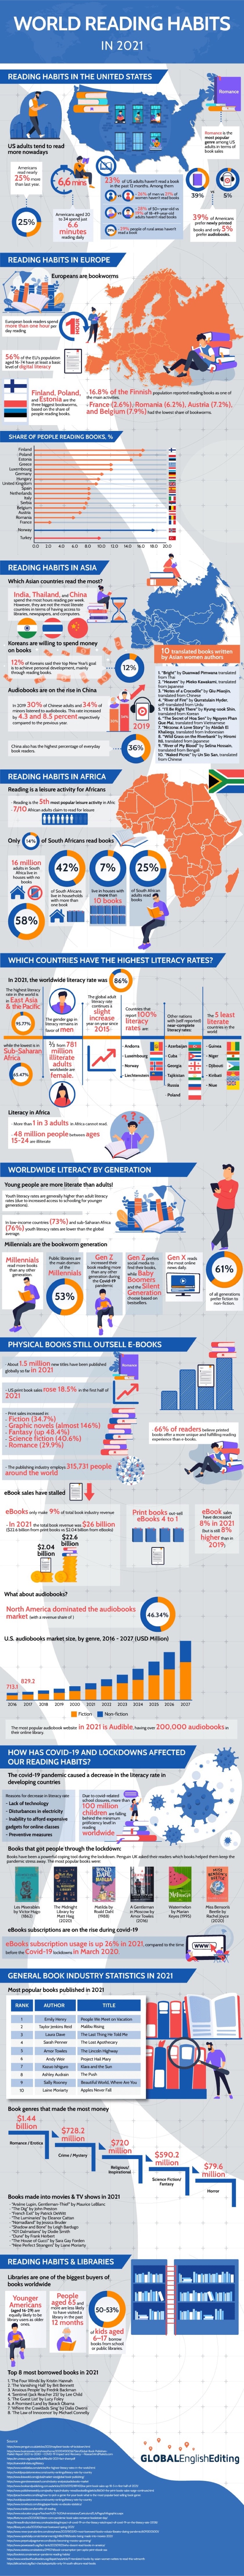 Reading books around the world in 2021 - full infographic